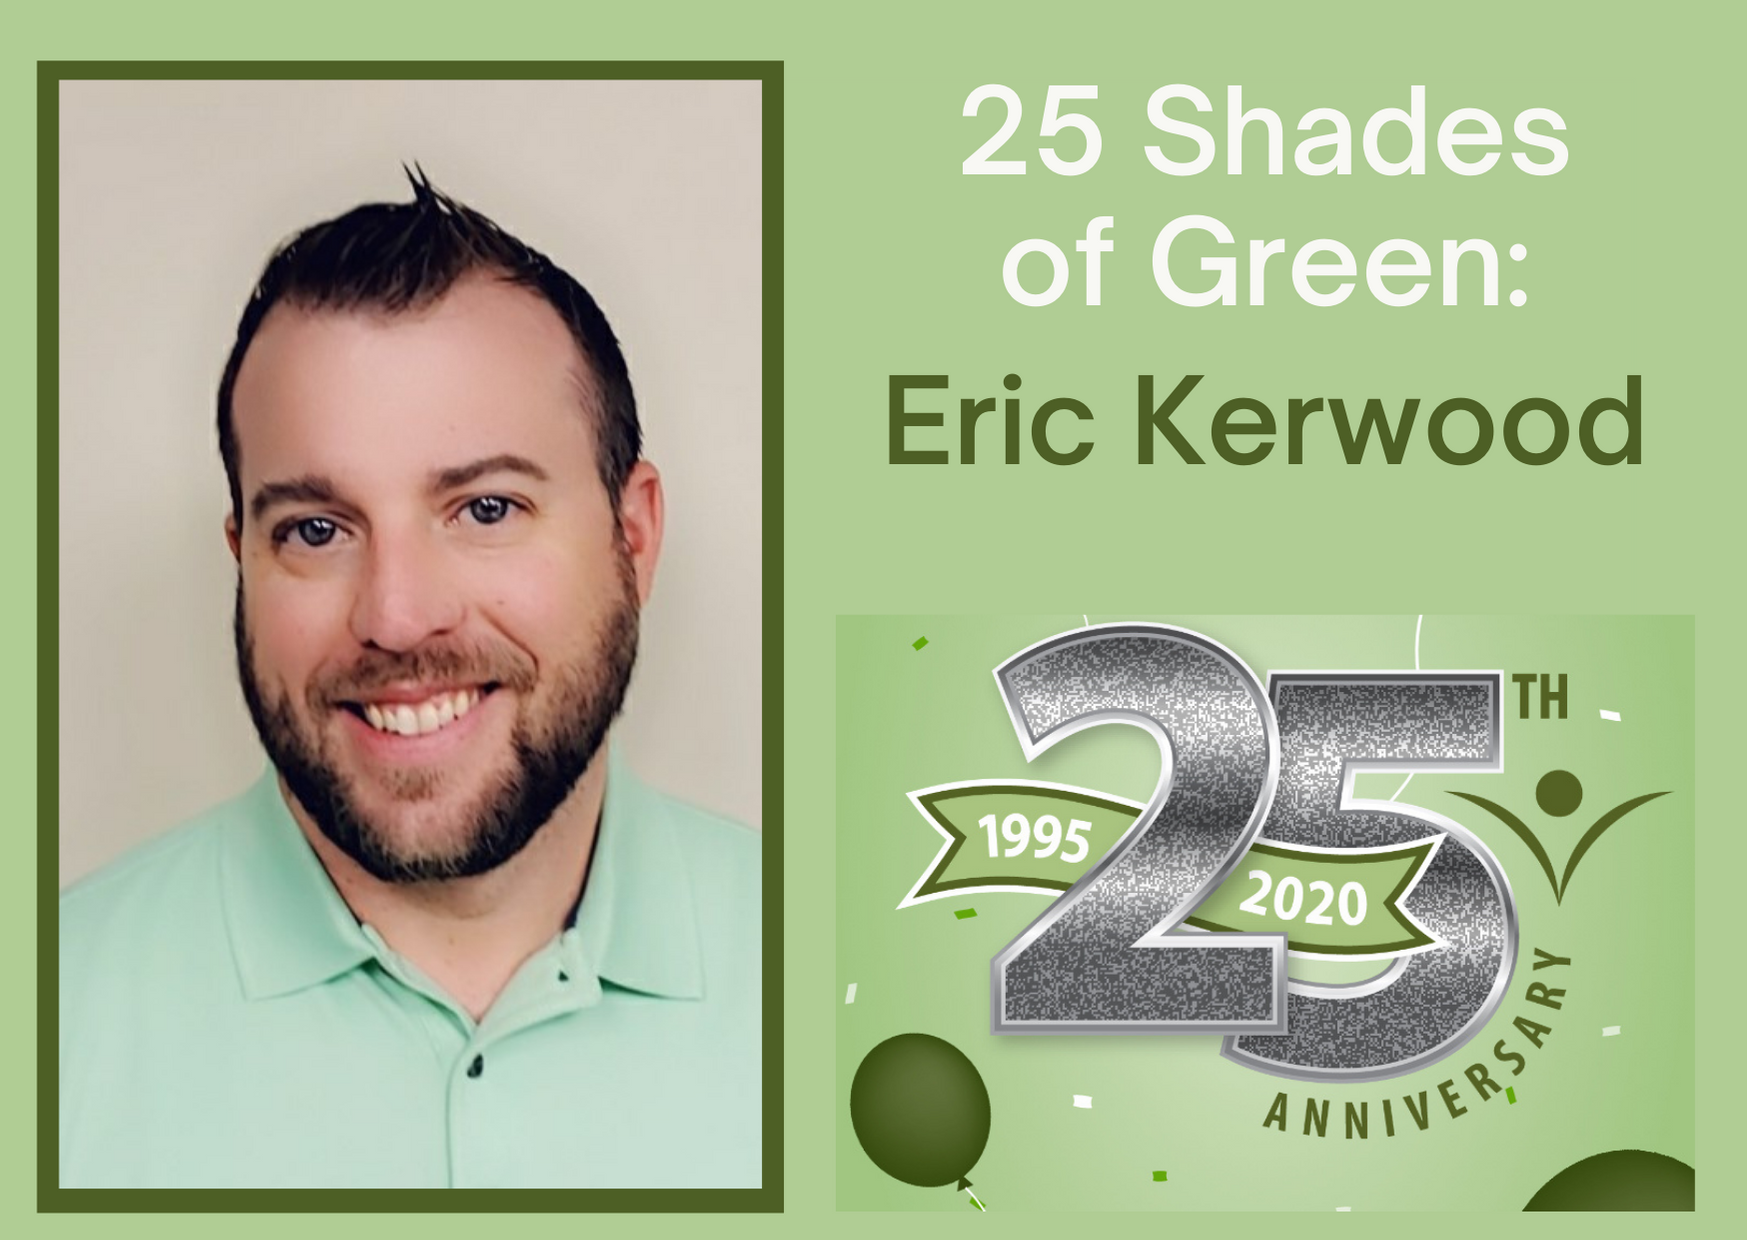 Eric Kerwood Shades of Green 25.png